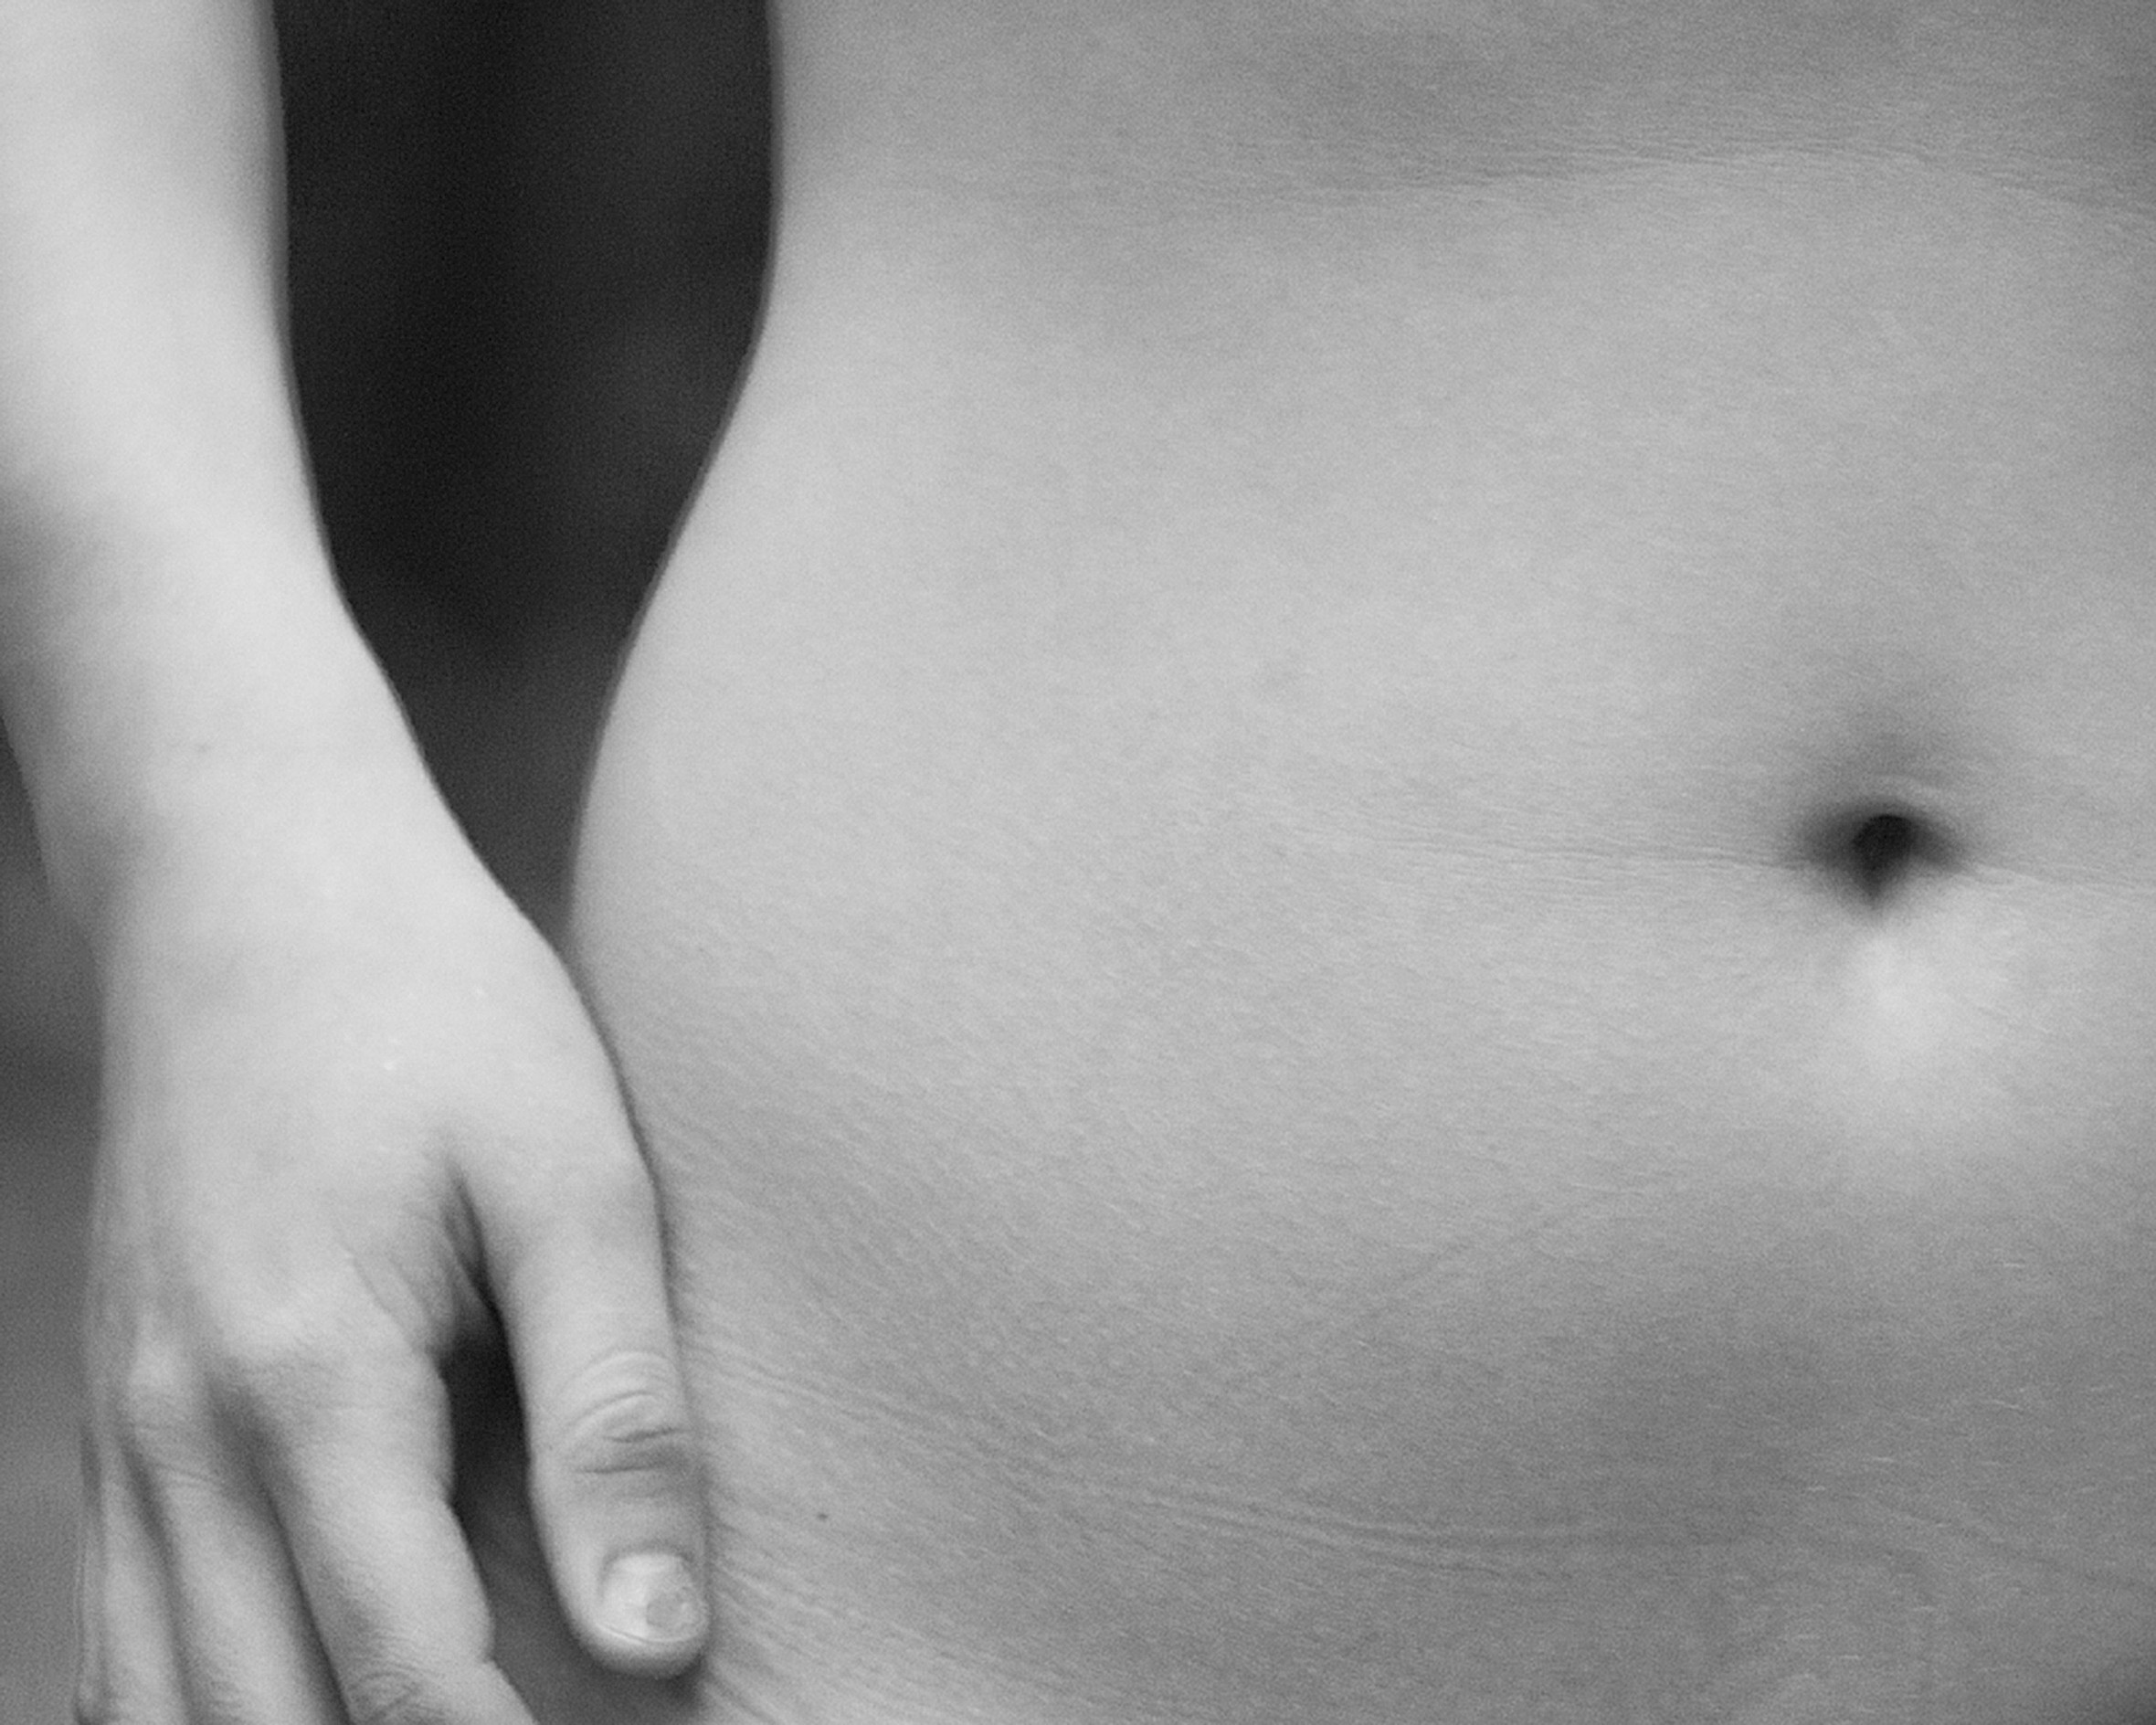 The right side of a woman’s bare stomach and right forearm are visible as she stands facing the camera.